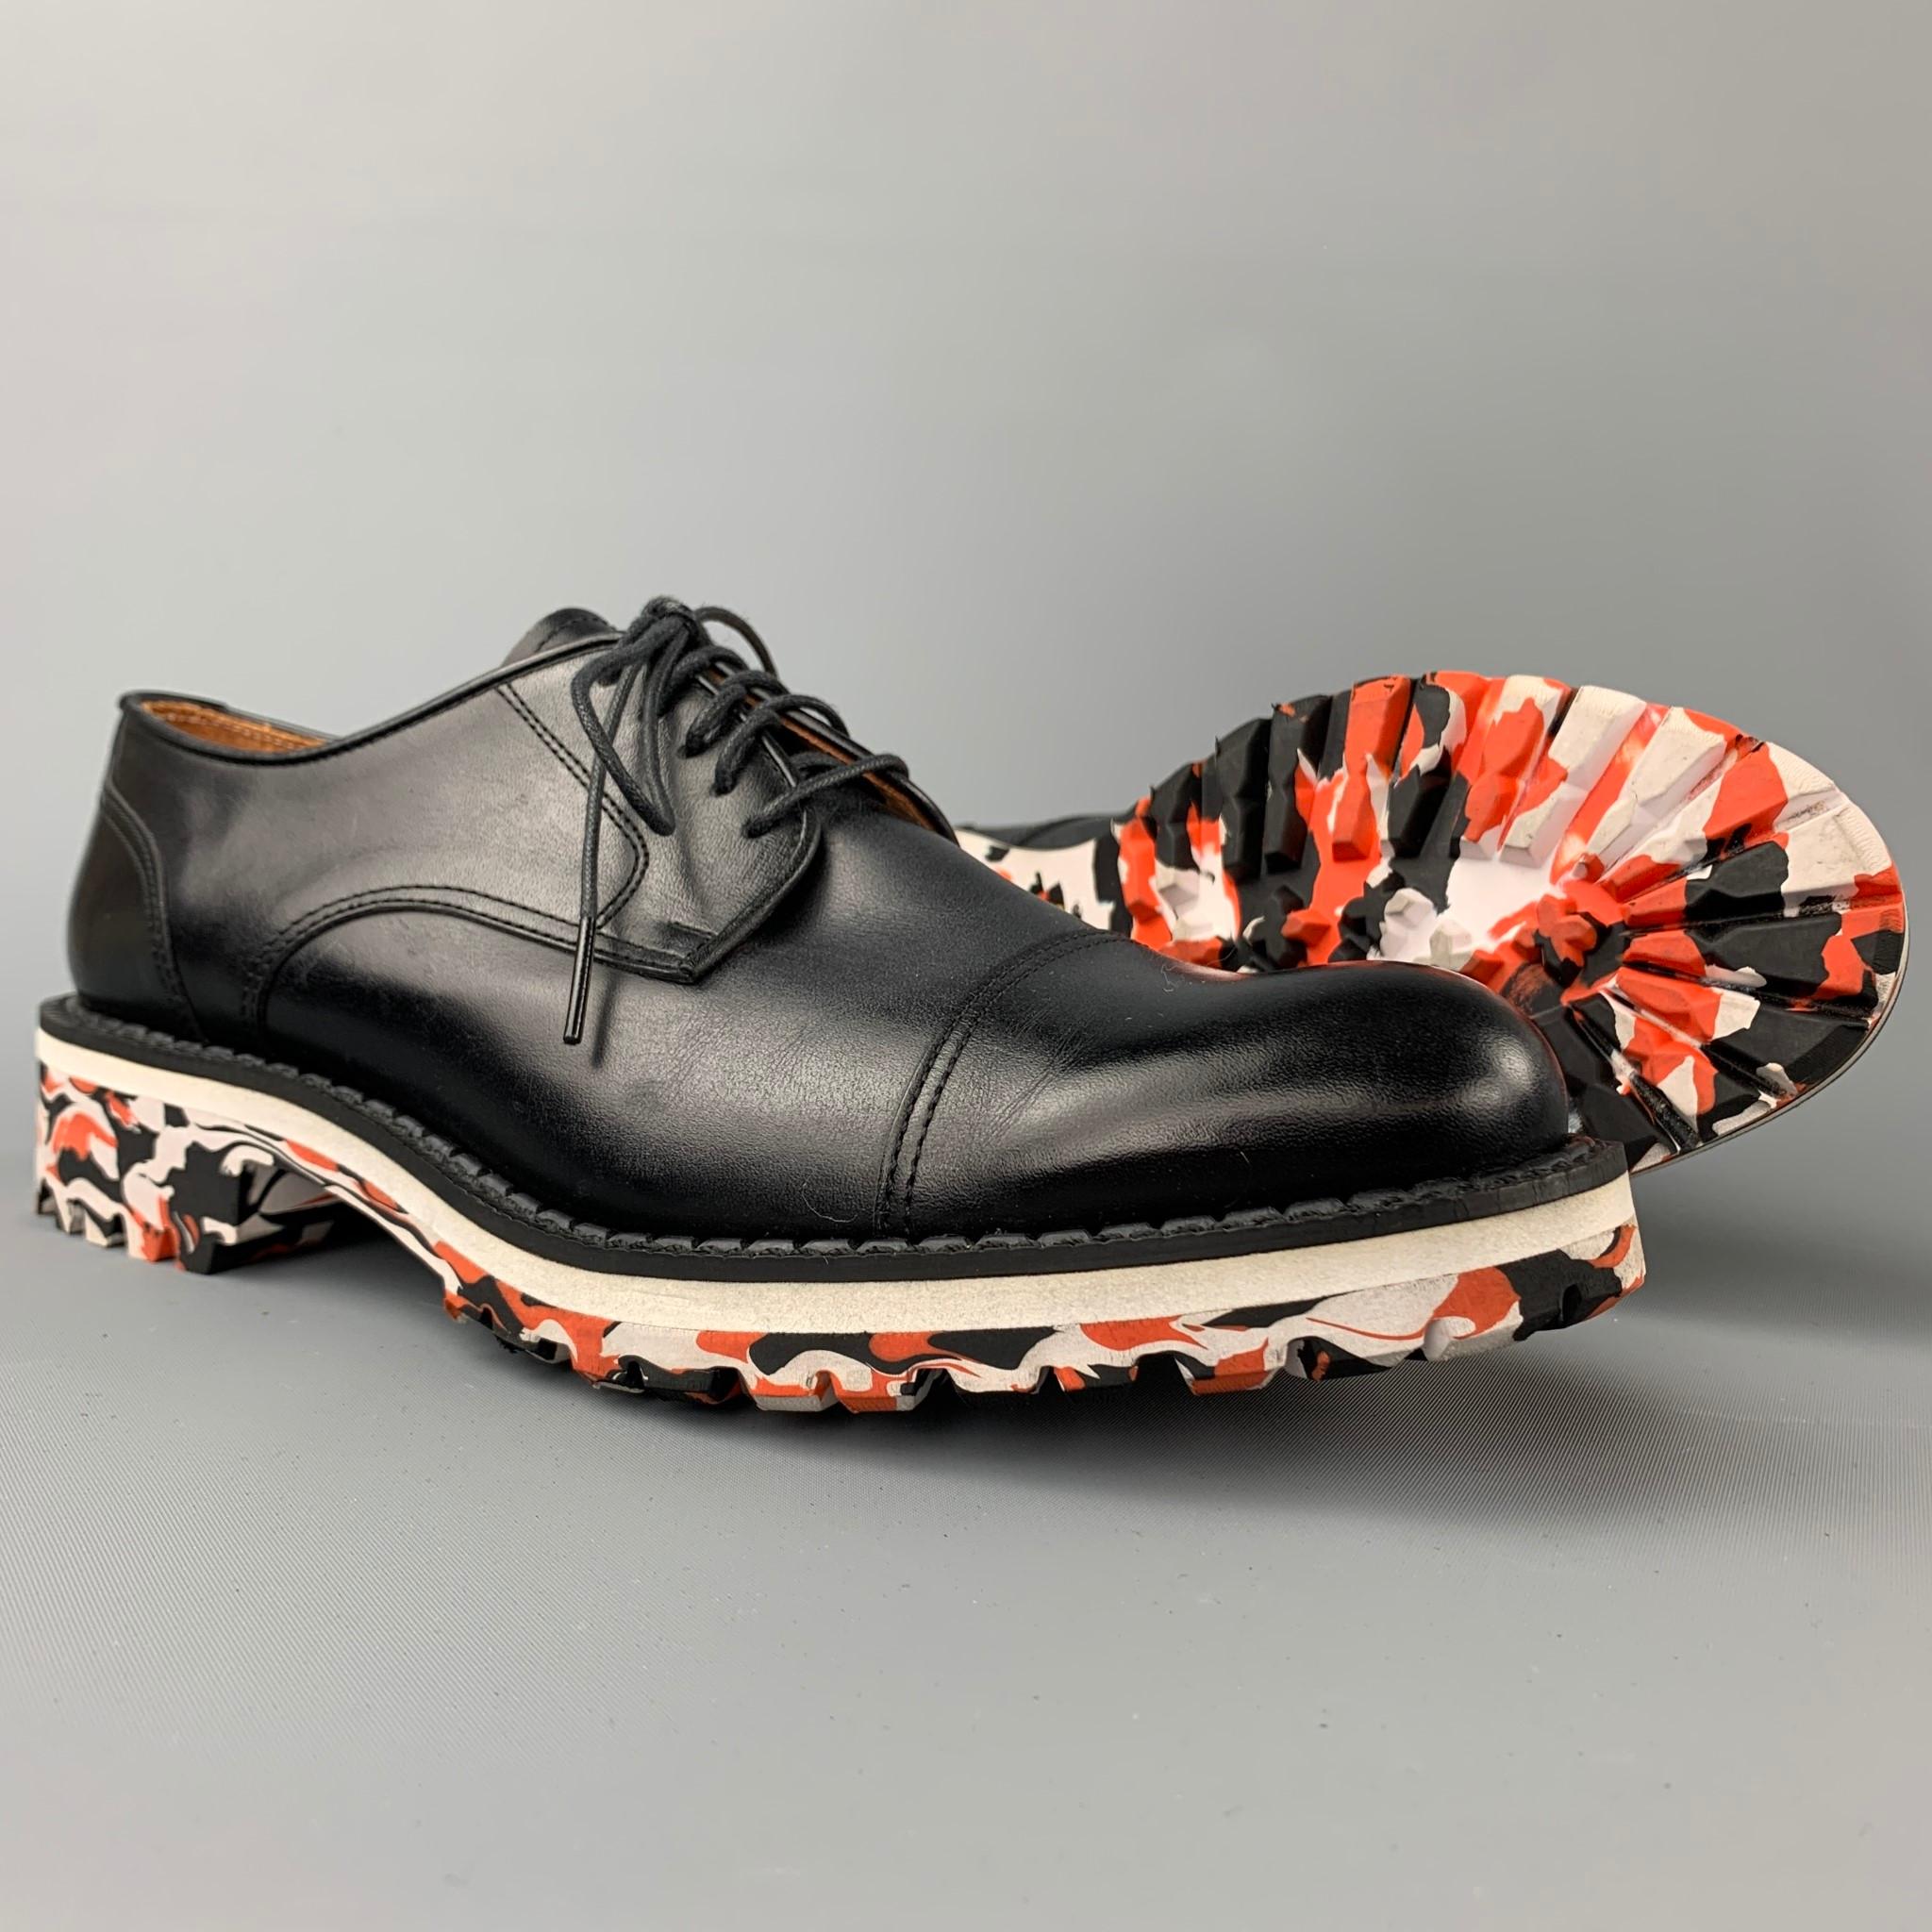 MIHARAYASUHIRO shoes comes in a black leather featuring a cap toe, multi-color vibram sole, and a lace up closure. 

Excellent Pre-Owned Condition.
Marked: 8425-0300 25

Outsole:

11 in. x 4 in. 